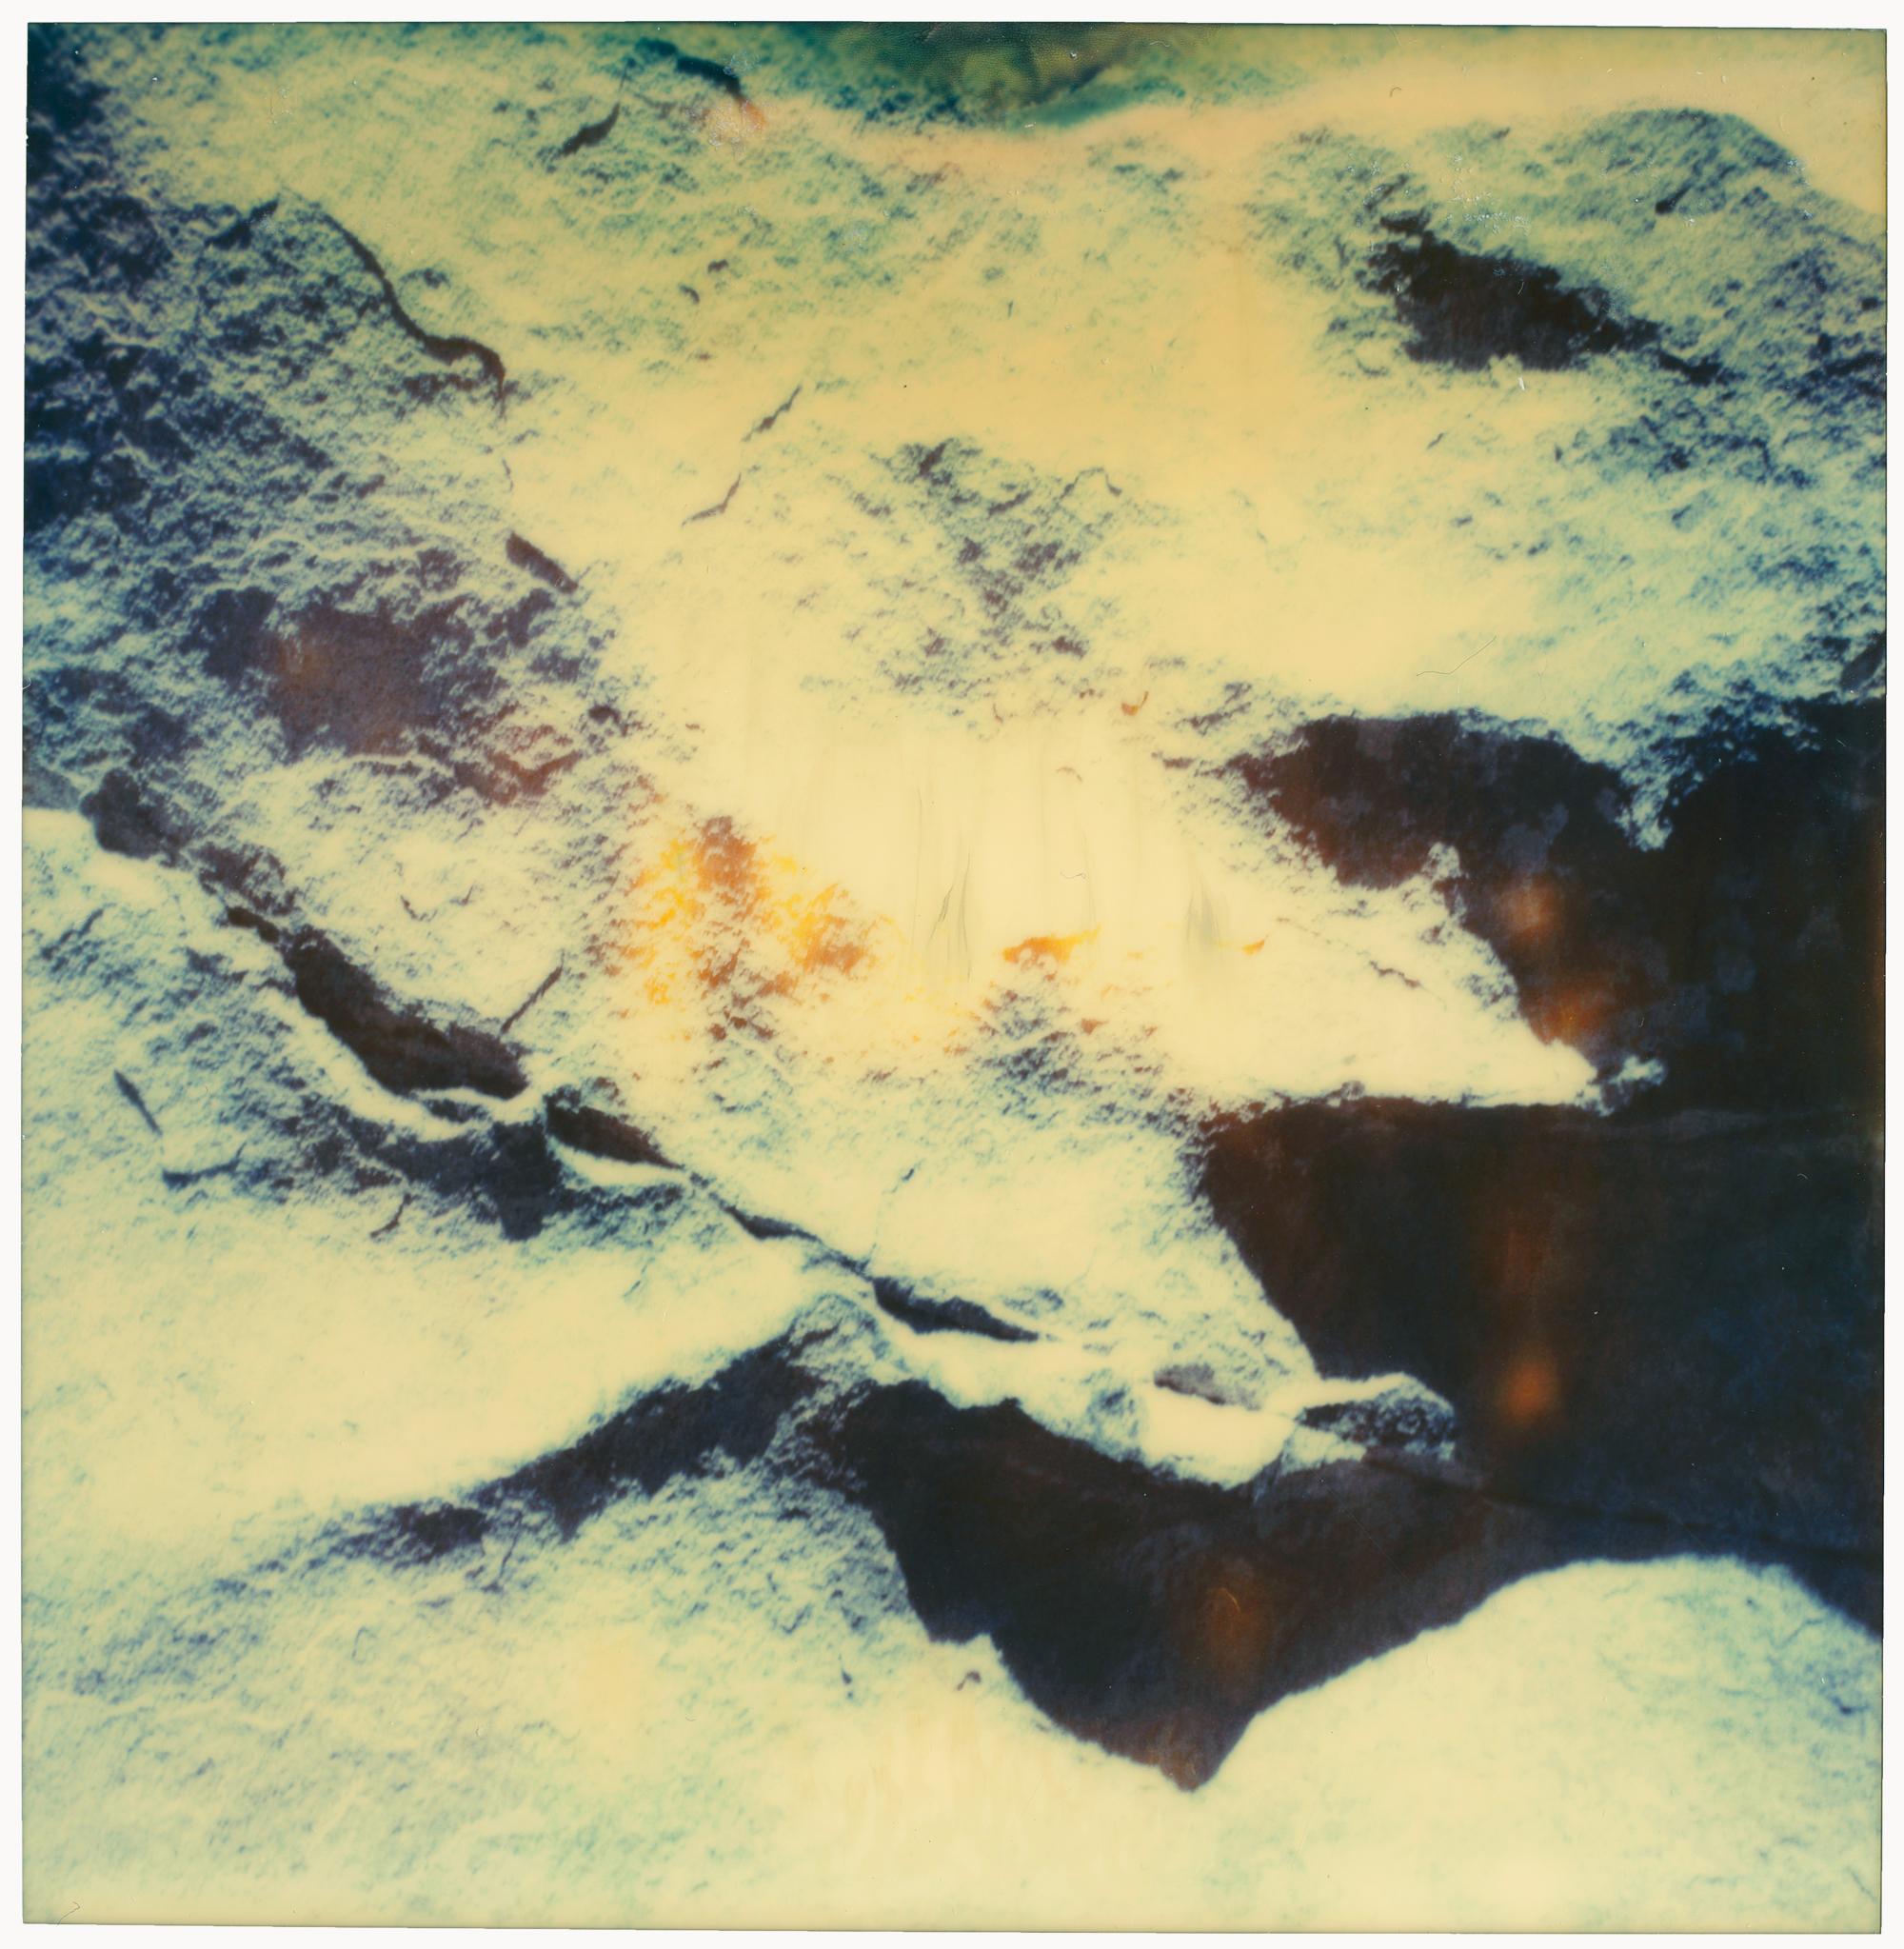 Stefanie Schneider Color Photograph - Moonscape - Planet of the Apes 03 - 21st Century, Polaroid, Abstract